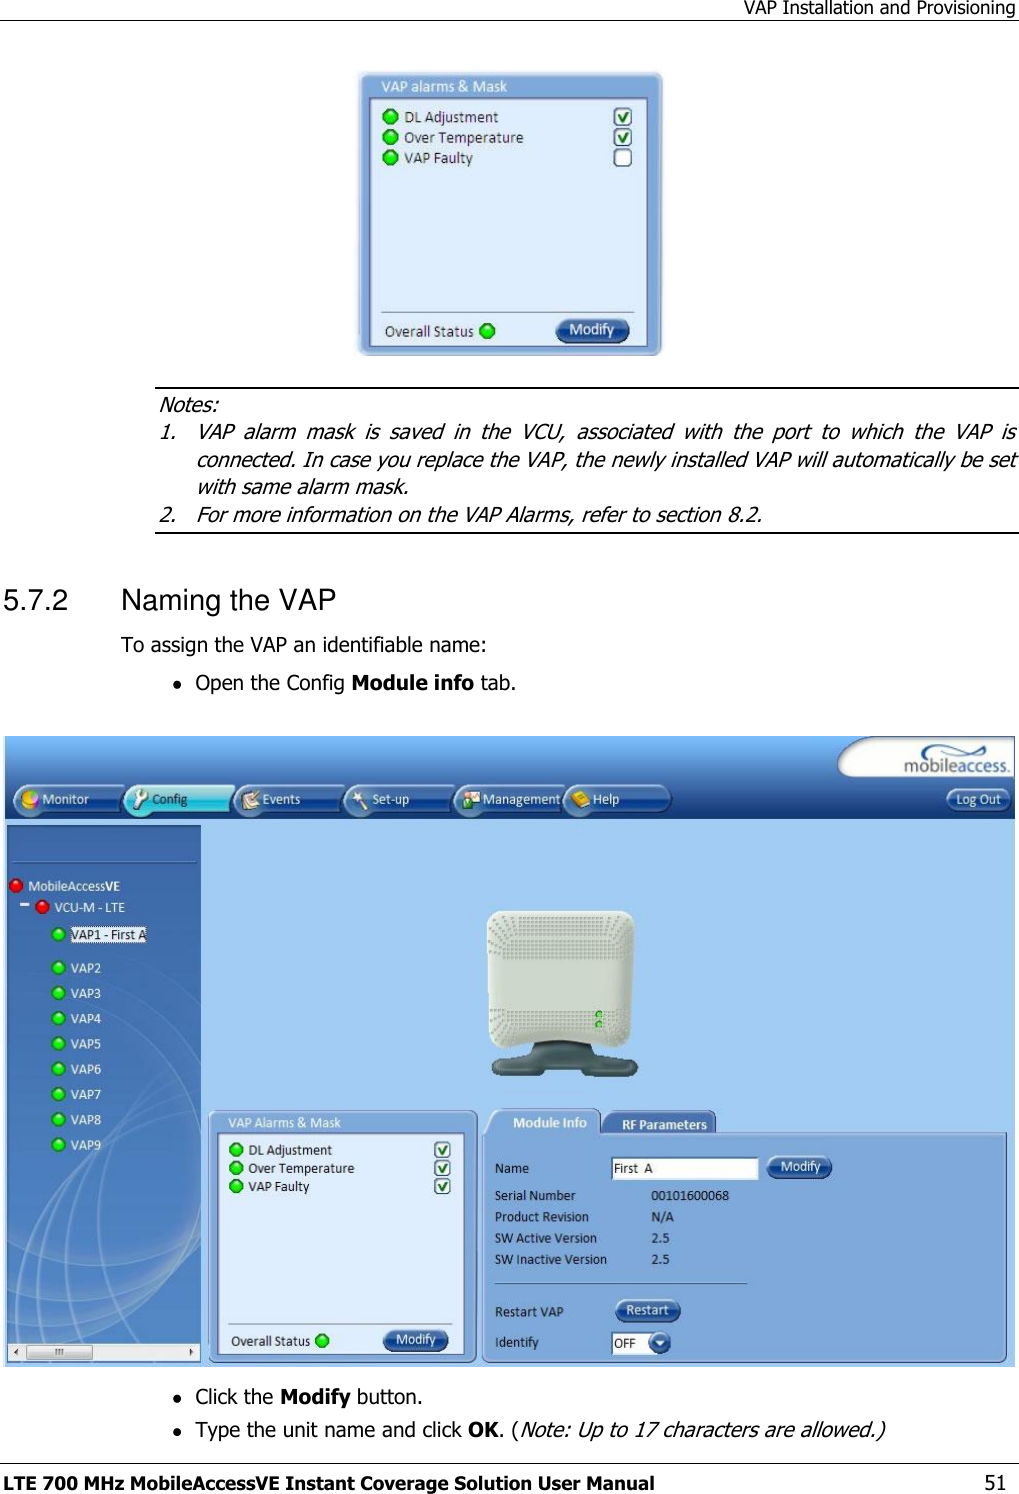 VAP Installation and Provisioning LTE 700 MHz MobileAccessVE Instant Coverage Solution User Manual  51  Notes: 1. VAP  alarm  mask  is  saved  in  the  VCU,  associated  with  the  port  to  which  the  VAP  is connected. In case you replace the VAP, the newly installed VAP will automatically be set with same alarm mask. 2. For more information on the VAP Alarms, refer to section 8.2. 5.7.2  Naming the VAP To assign the VAP an identifiable name:  Open the Config Module info tab.     Click the Modify button.  Type the unit name and click OK. (Note: Up to 17 characters are allowed.) 